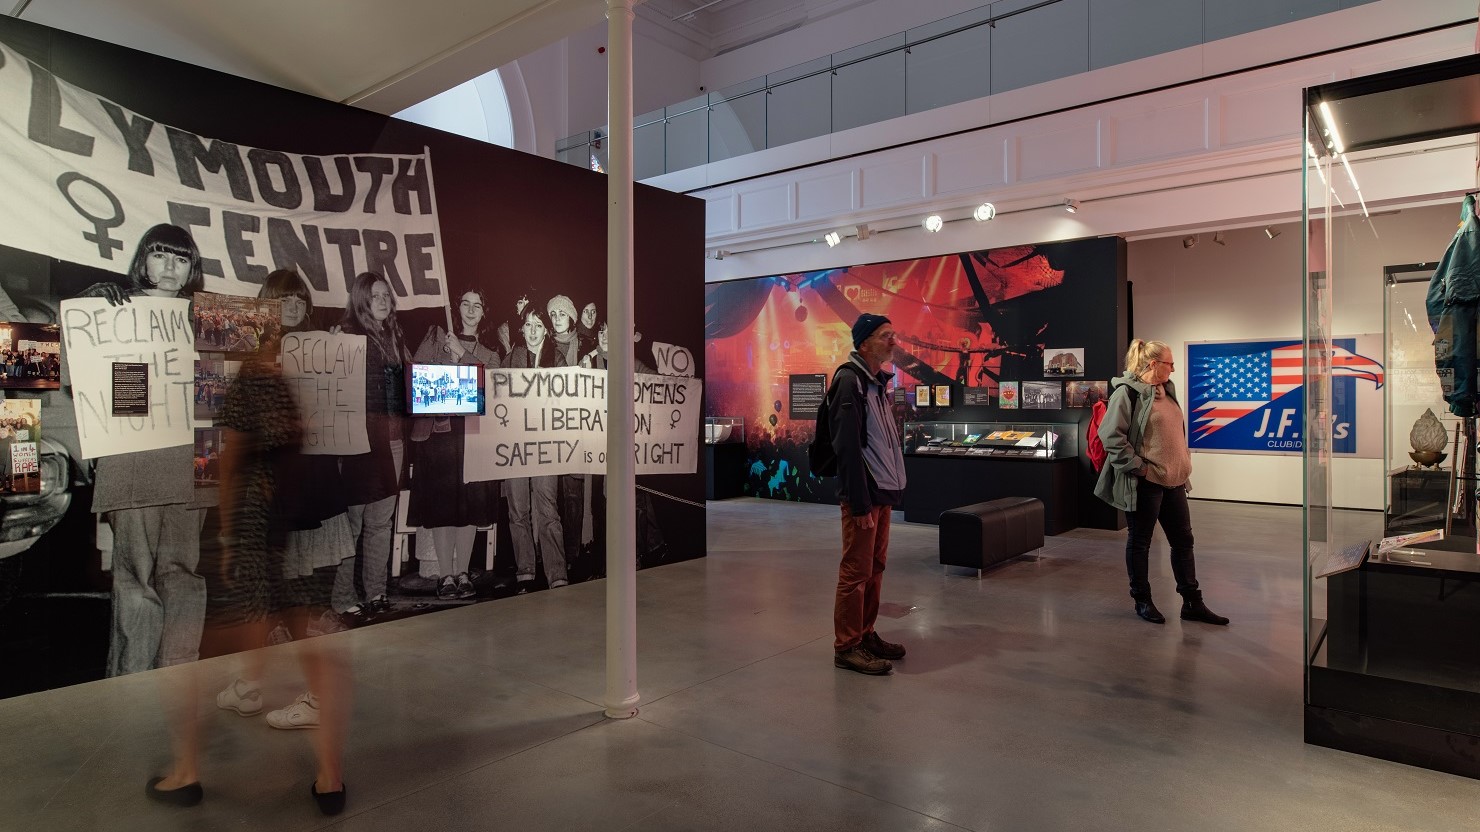 Visitors looking at the 'because the night belongs to us' exhibition